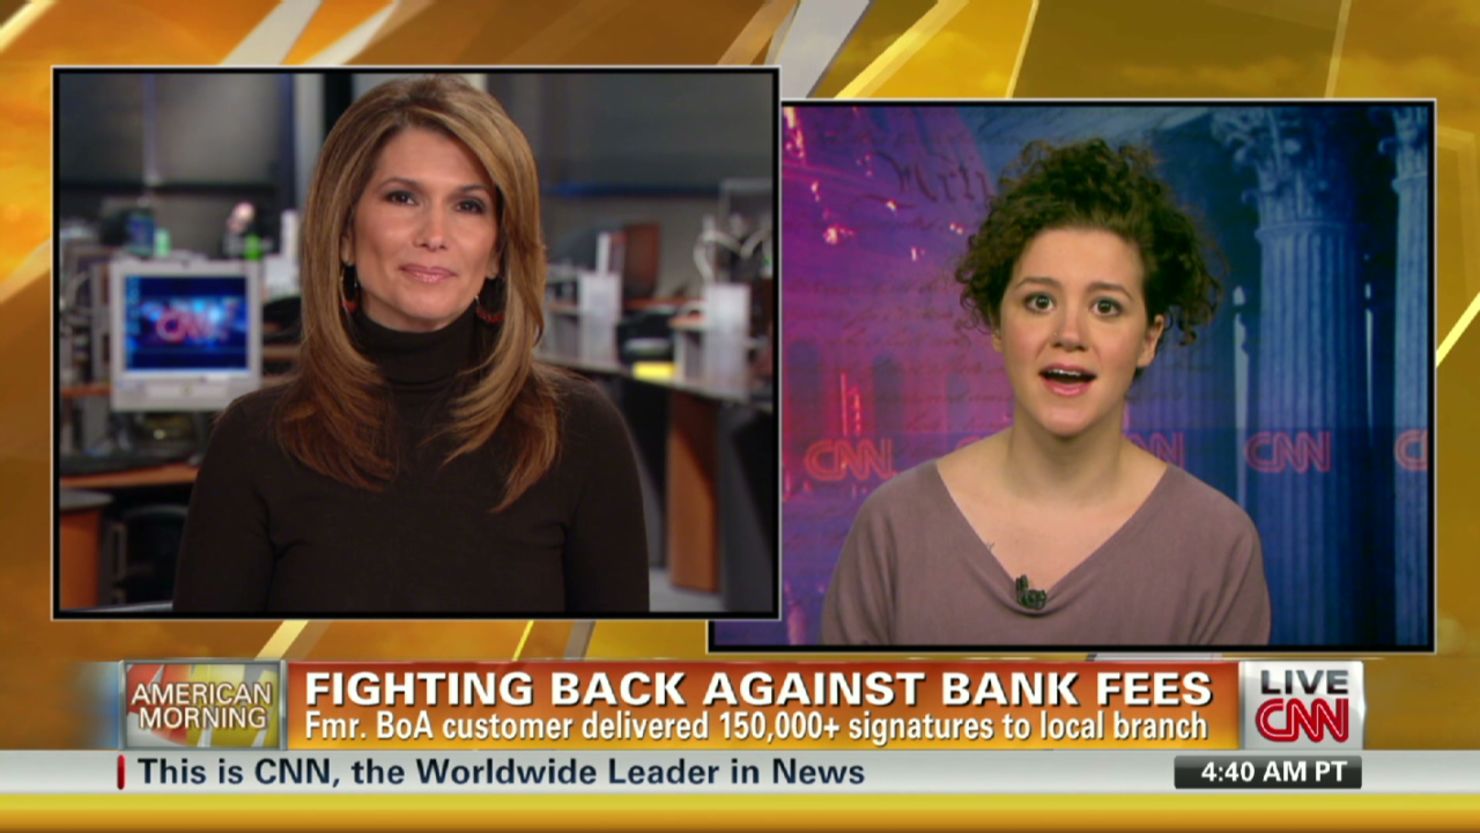 Molly Katchpole, right, led an online campaign against Bank of America's planned debit card fee.